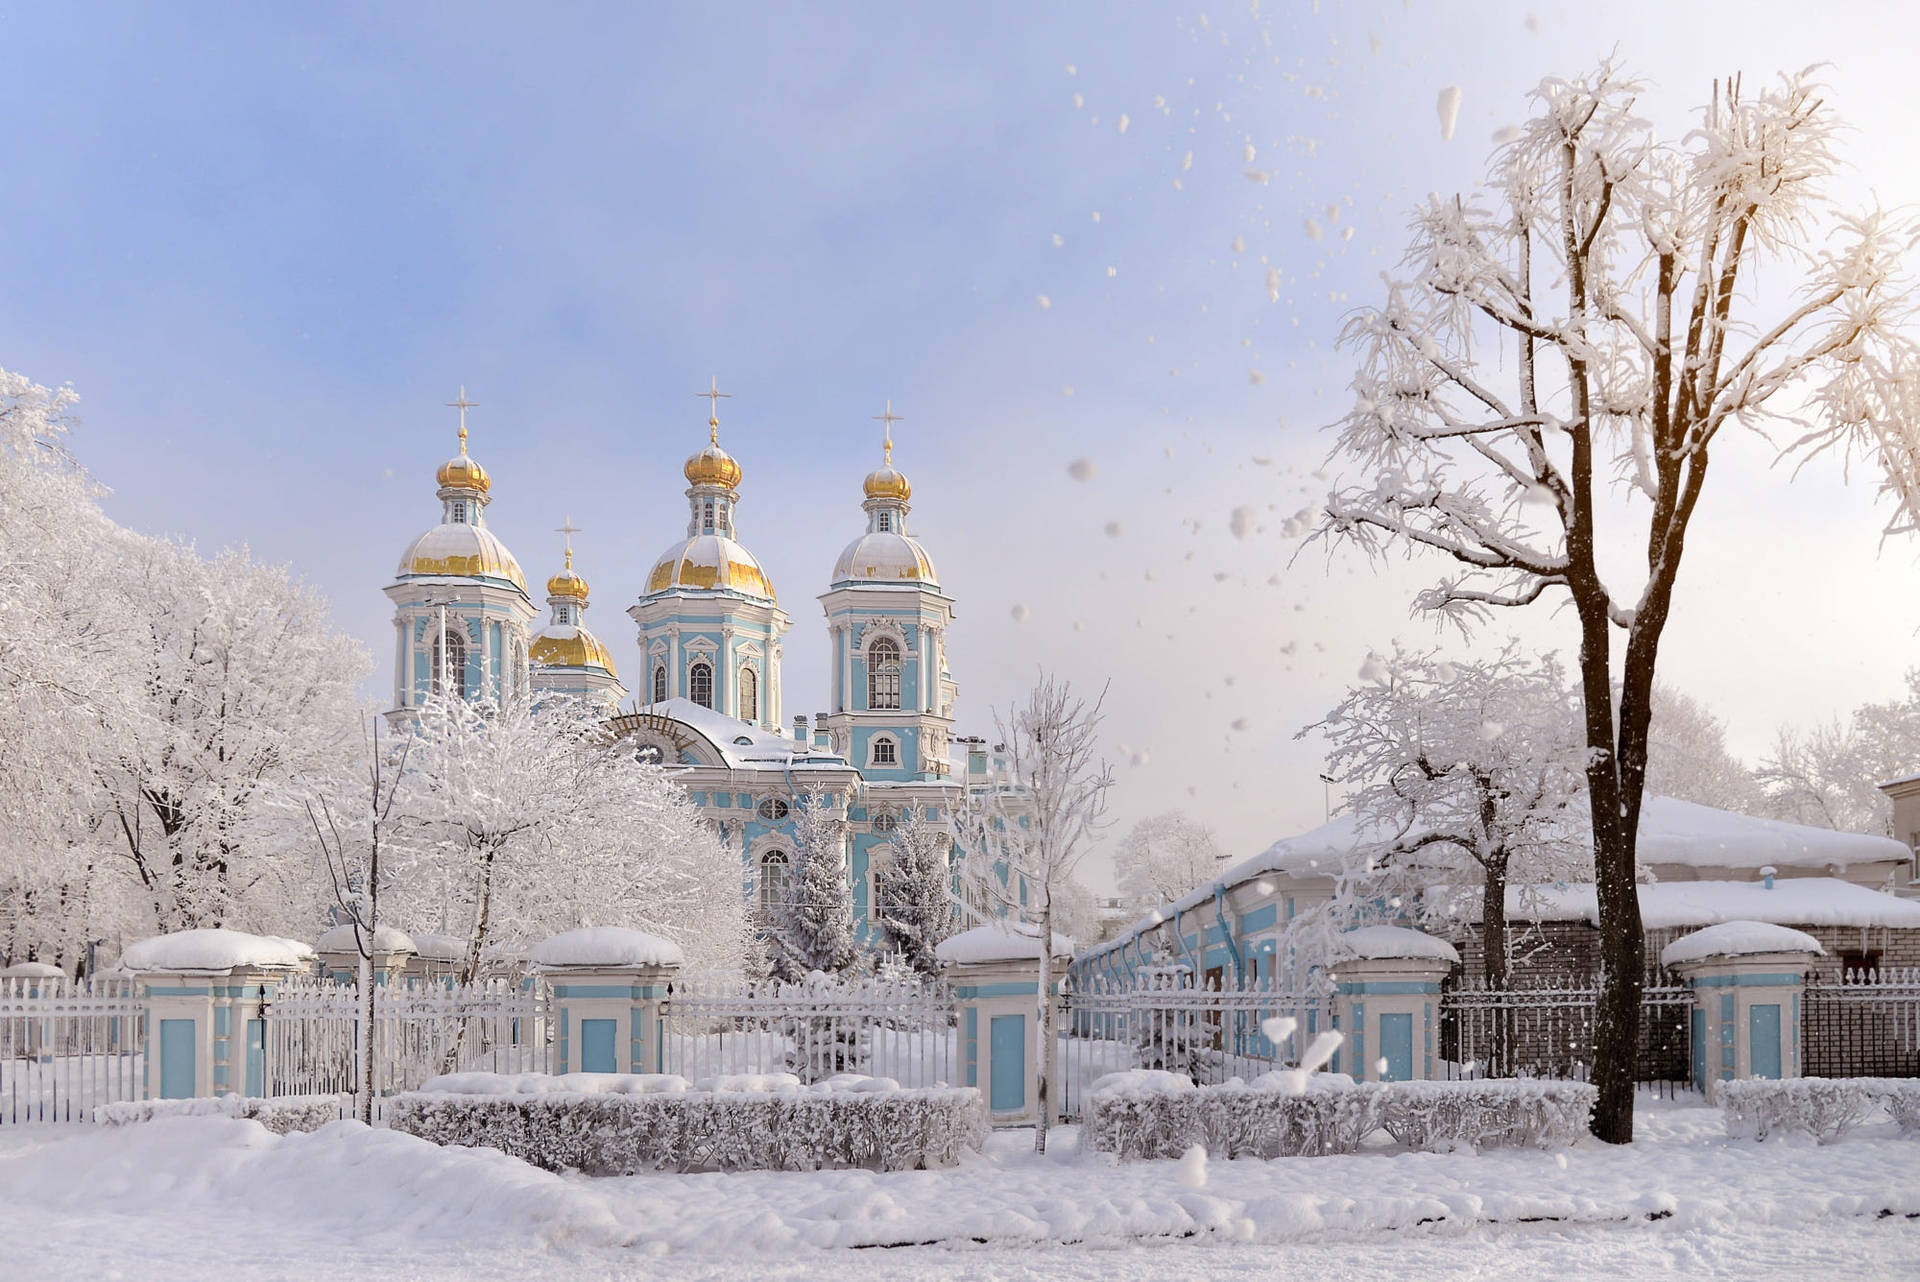 St. Nicholas Naval Cathedral Russia Wallpaper